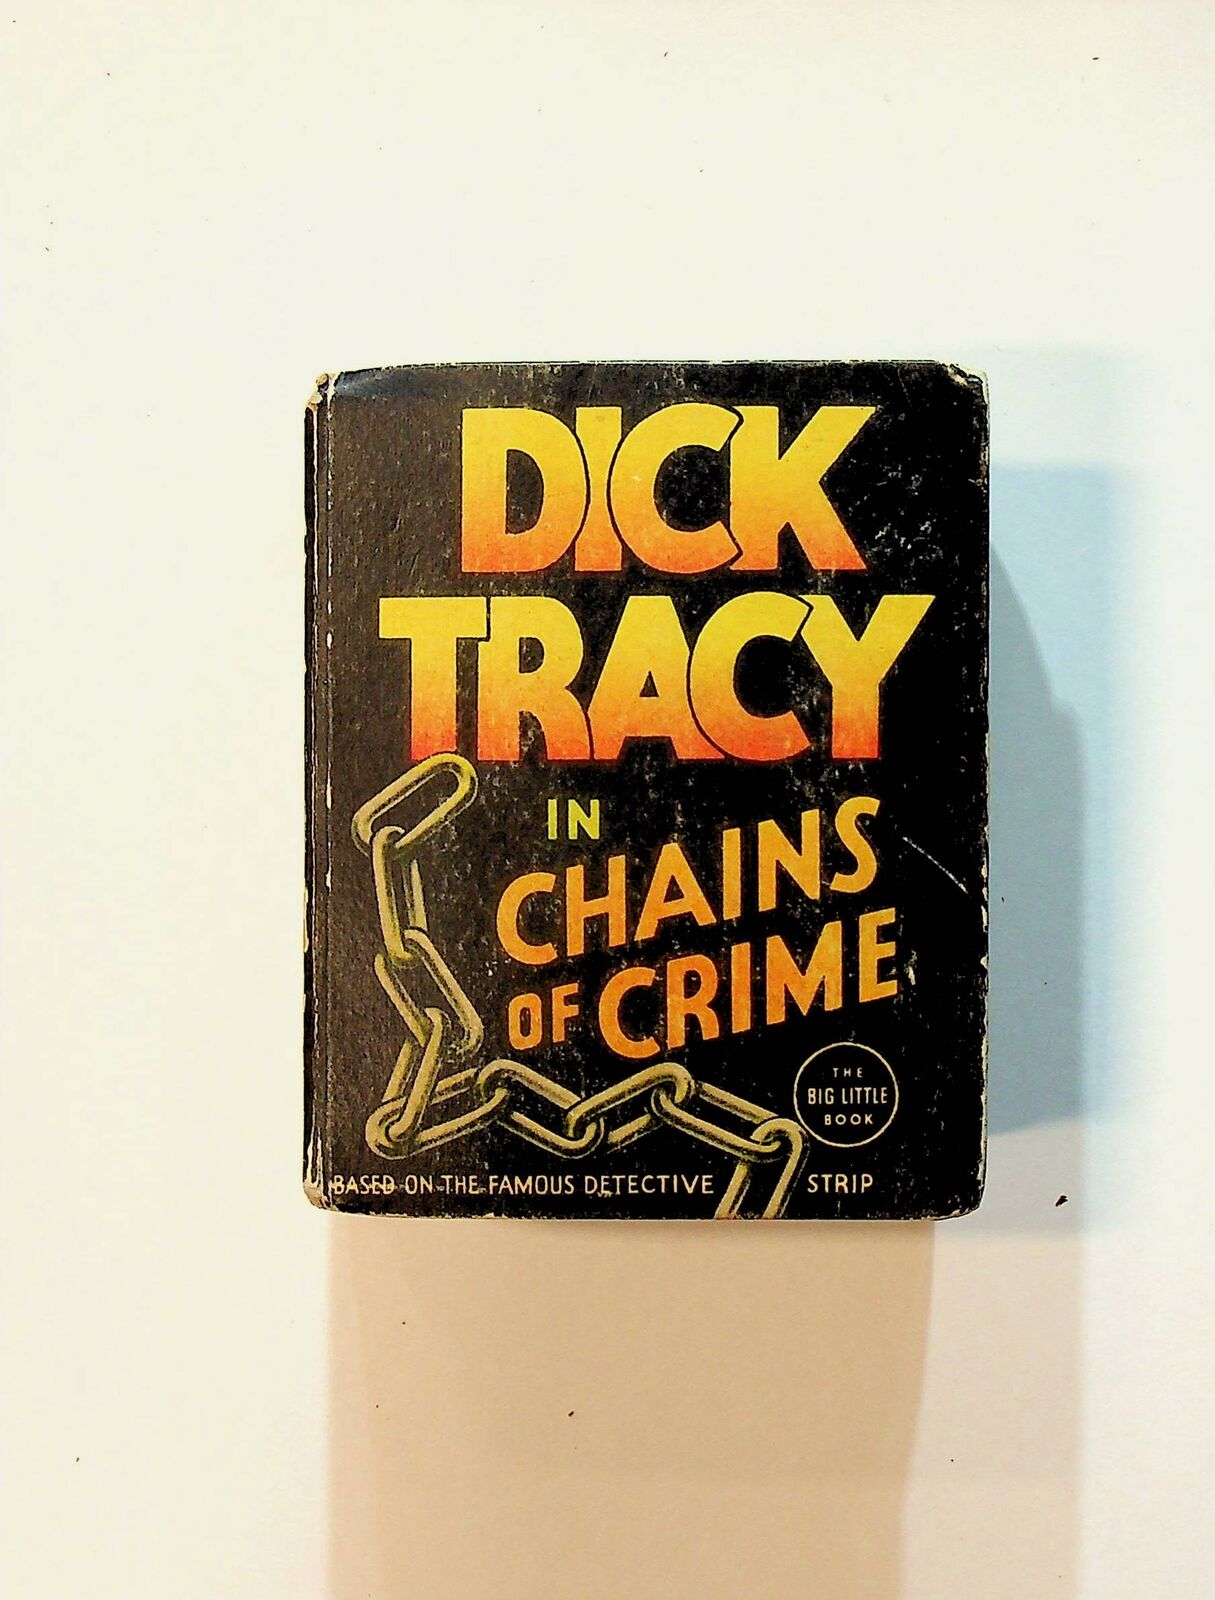 Dick Tracy in Chains of Crime #1185 FN 1936